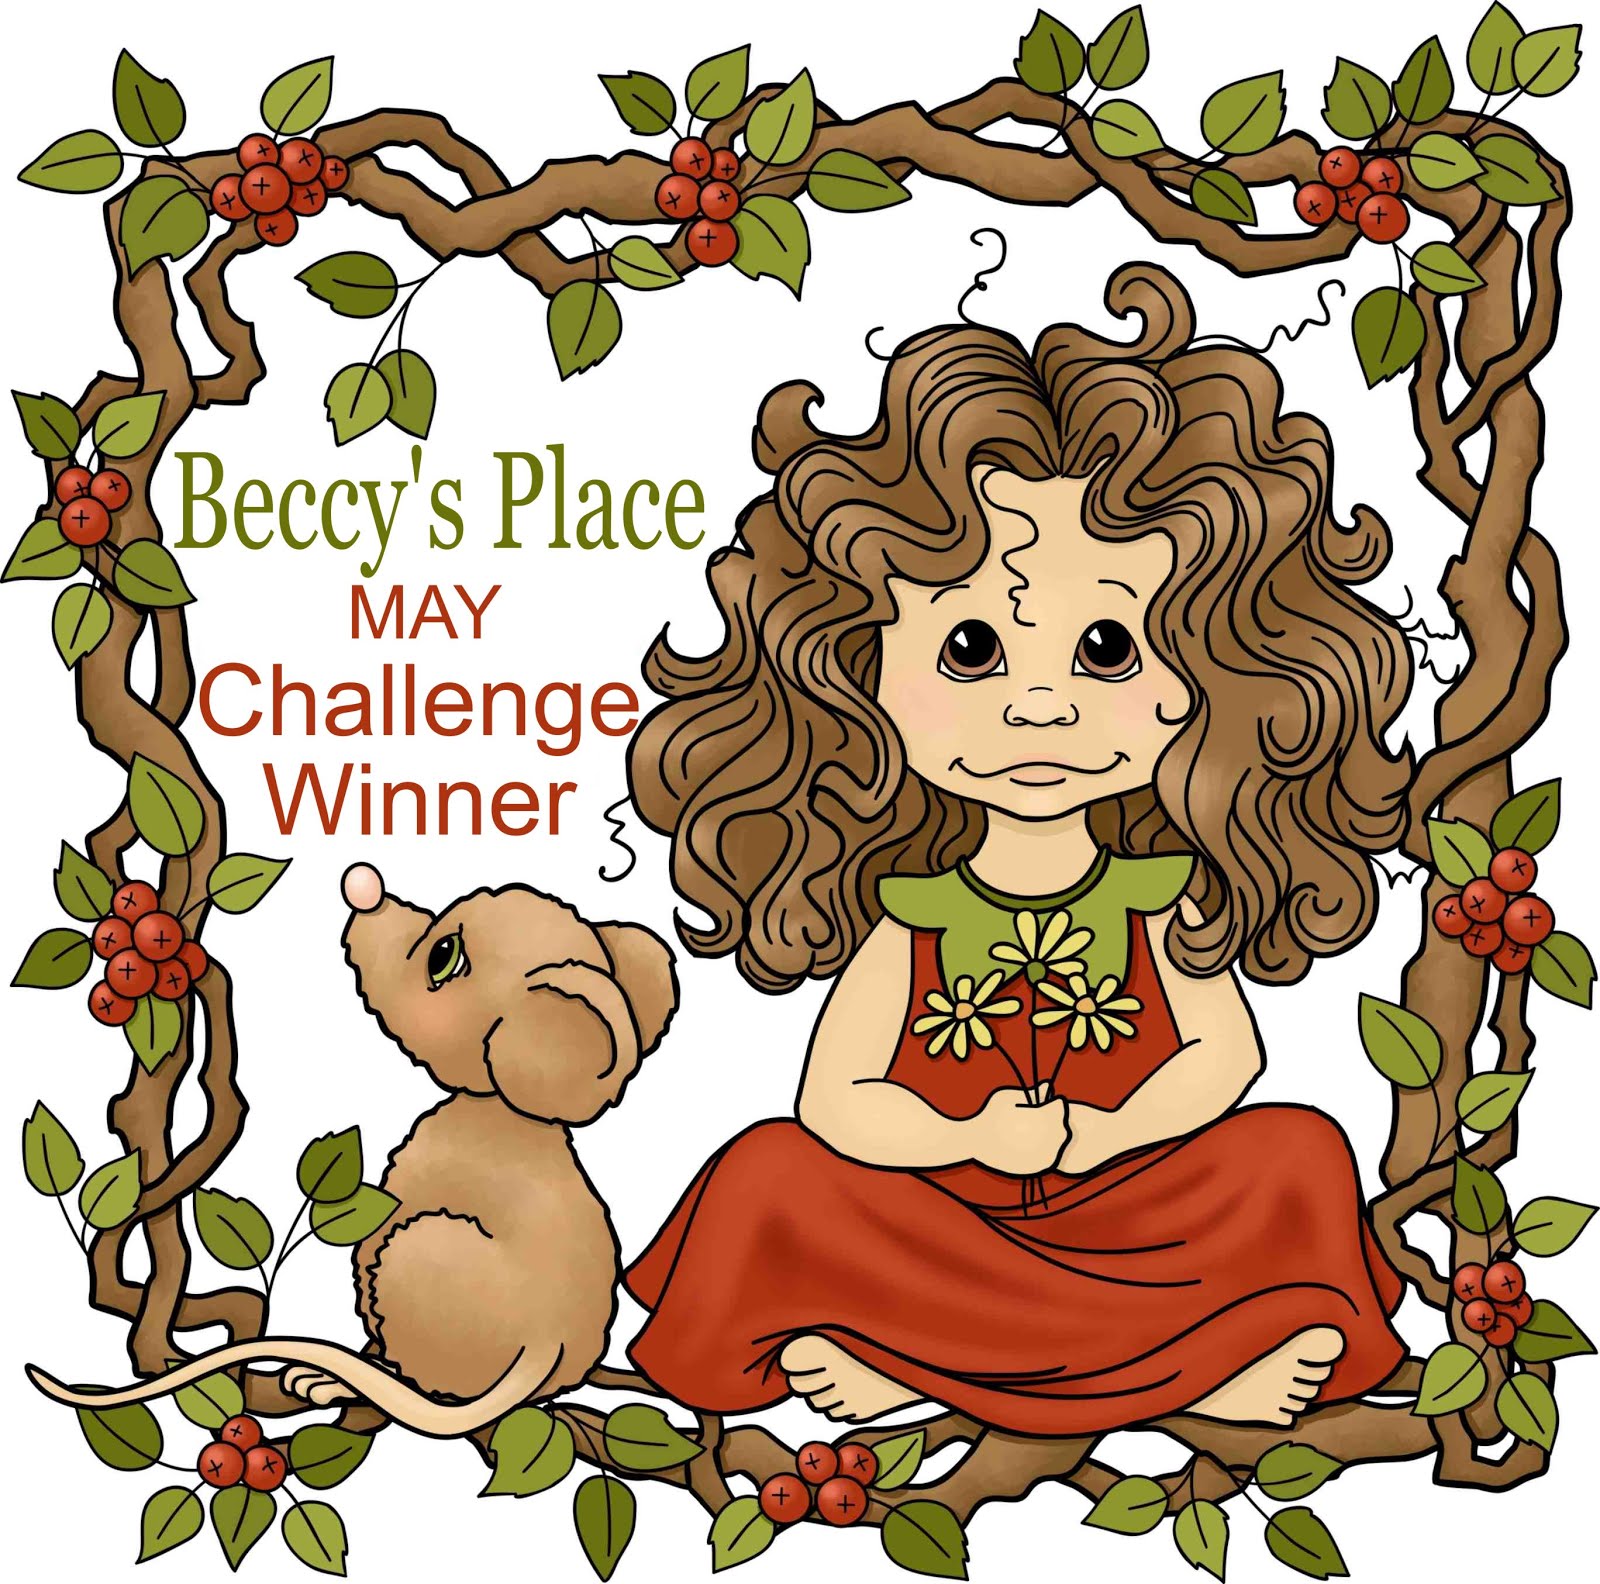 Beccy's Place Winner